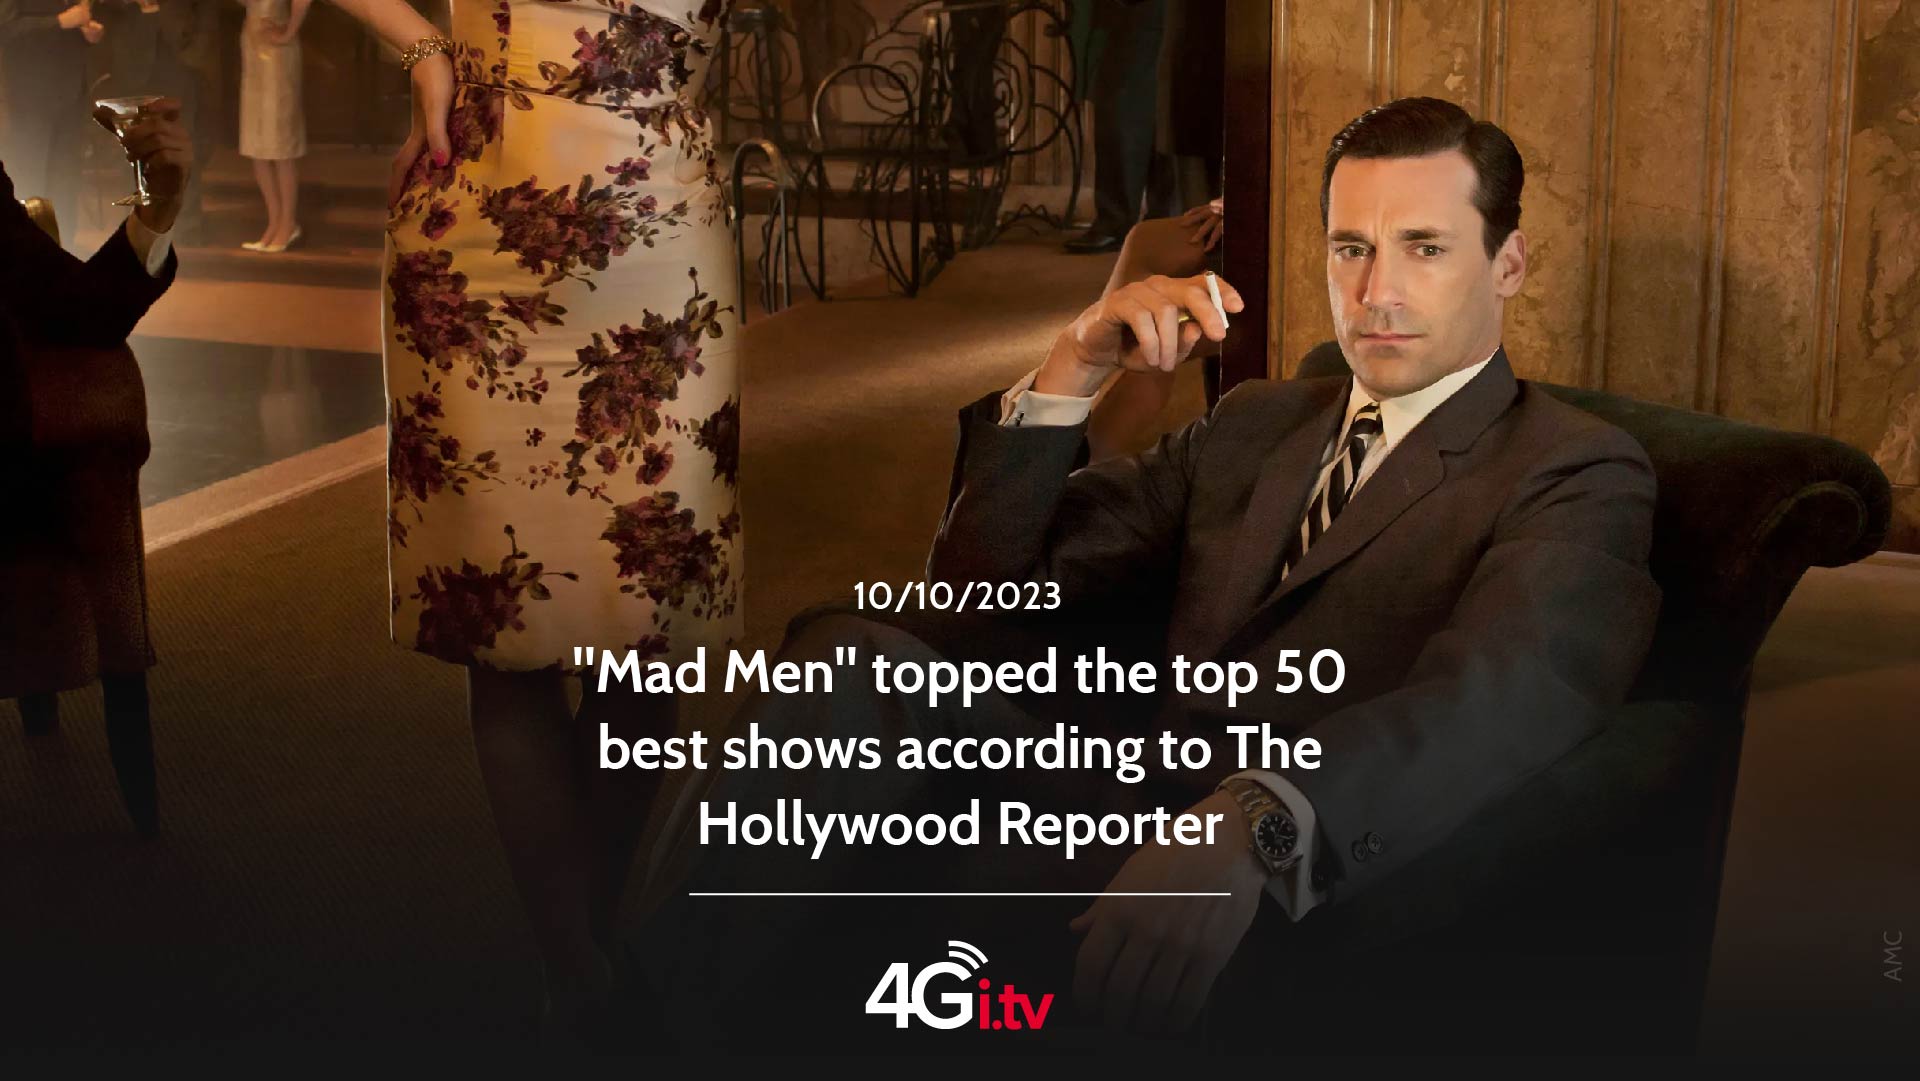 Lesen Sie mehr über den Artikel “Mad Men” topped the top 50 best shows according to The Hollywood Reporter